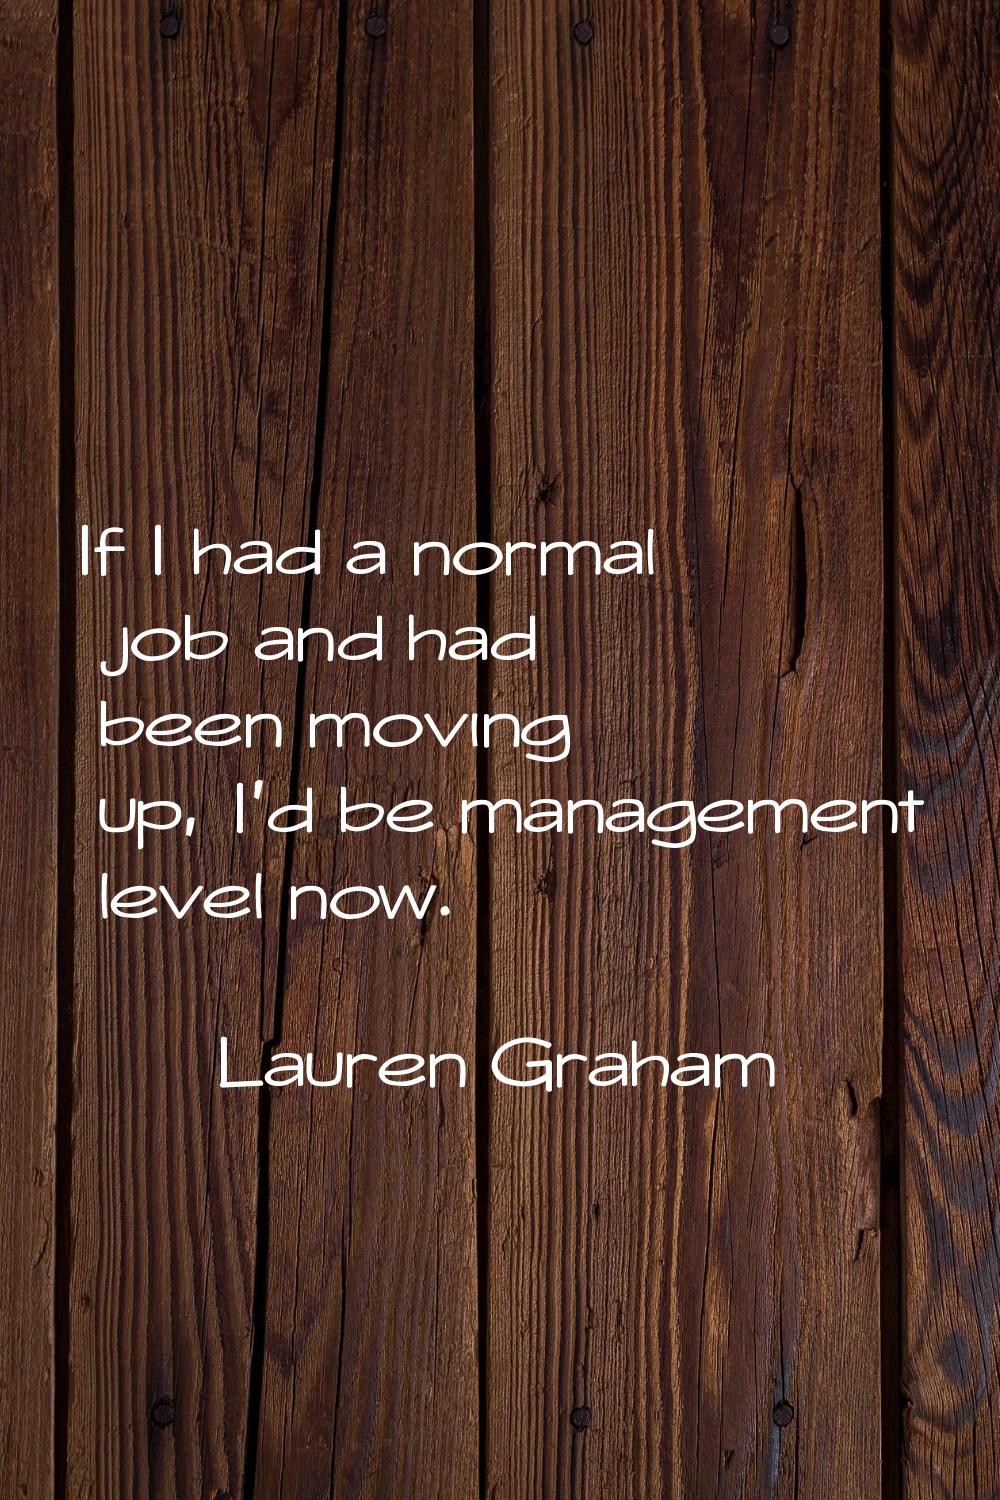 If I had a normal job and had been moving up, I'd be management level now.